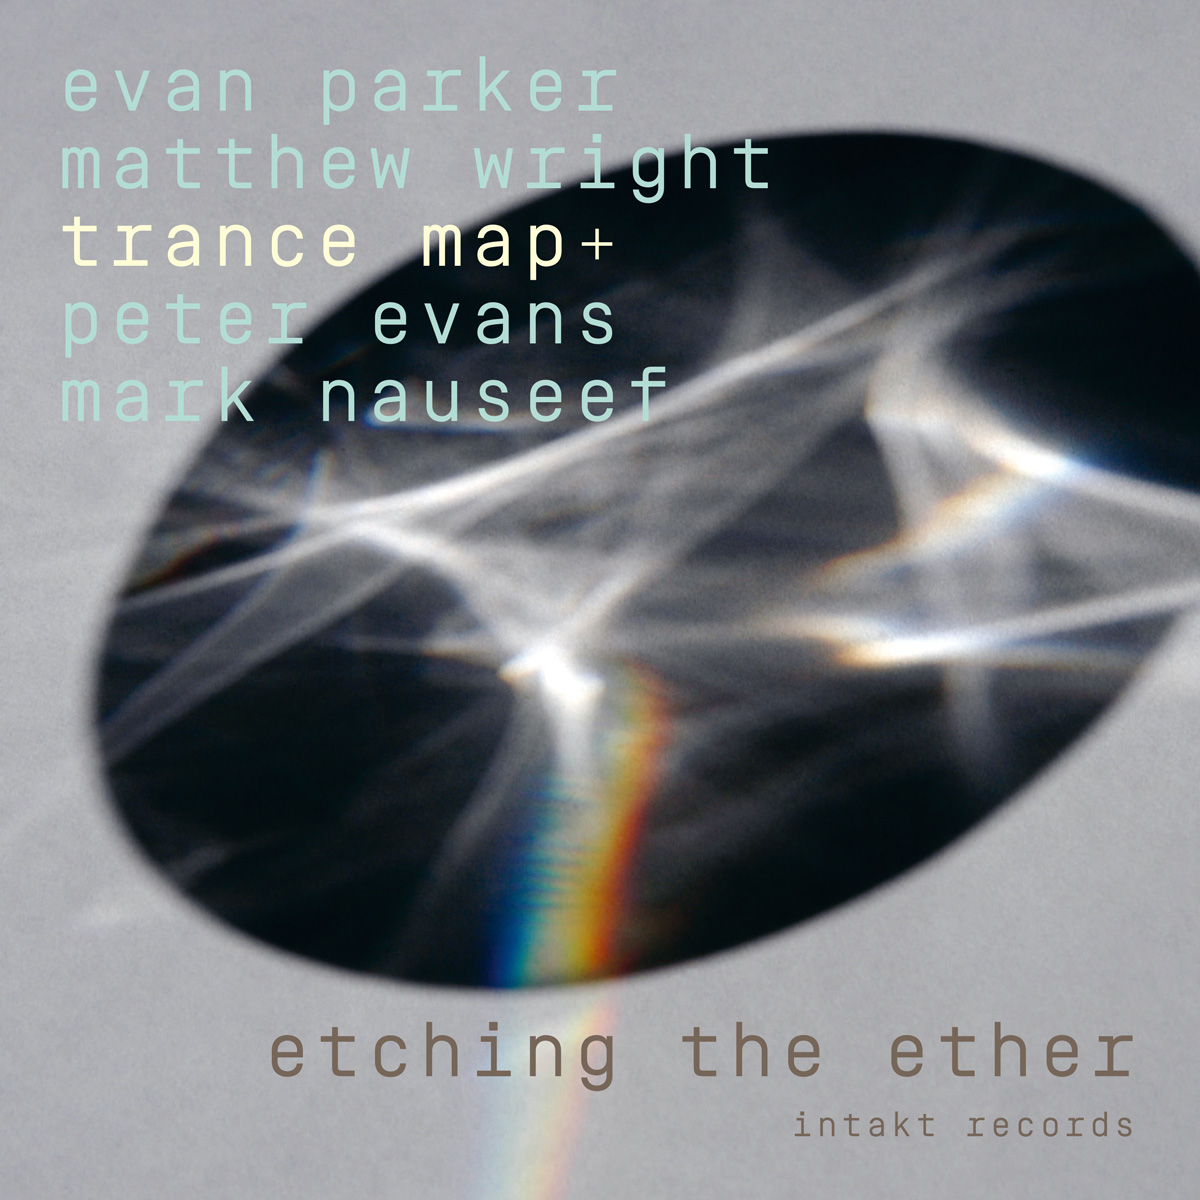 EVAN PARKER MATTHEW WRIGHT TRANCE MAP+
PETER EVANS AND MARK NAUSEEF
ETCHING THE ETHER cover front